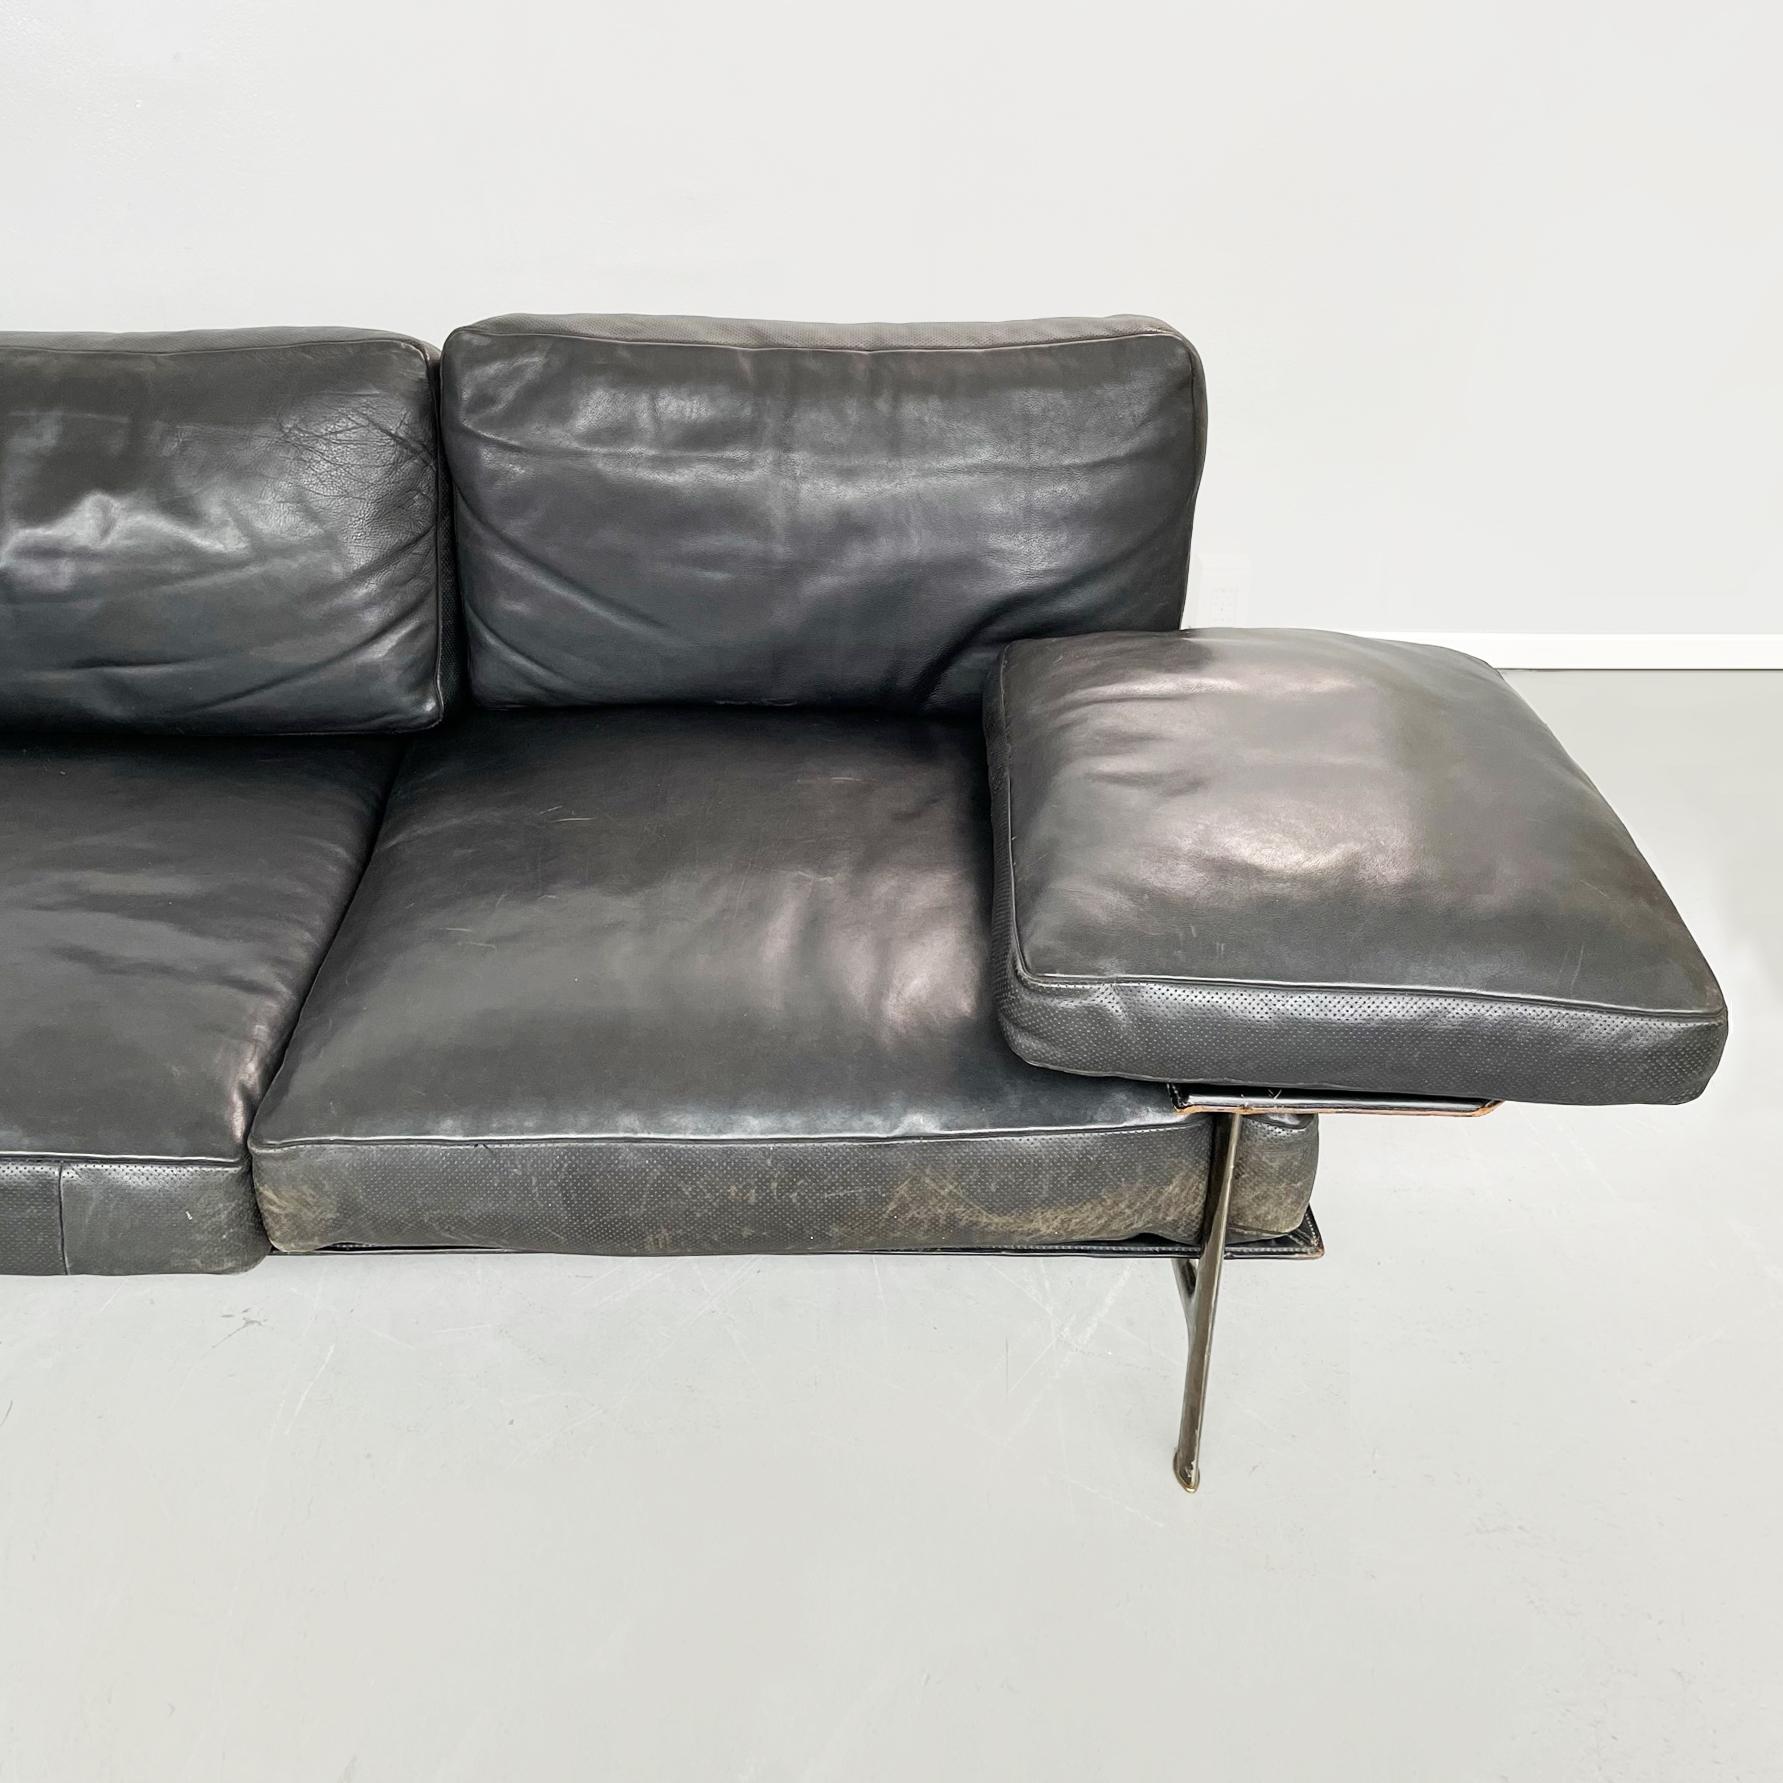 Italian Modern Black Leather Sofa Diesis by Antonio Citterio for B&B, 1980s In Good Condition For Sale In MIlano, IT